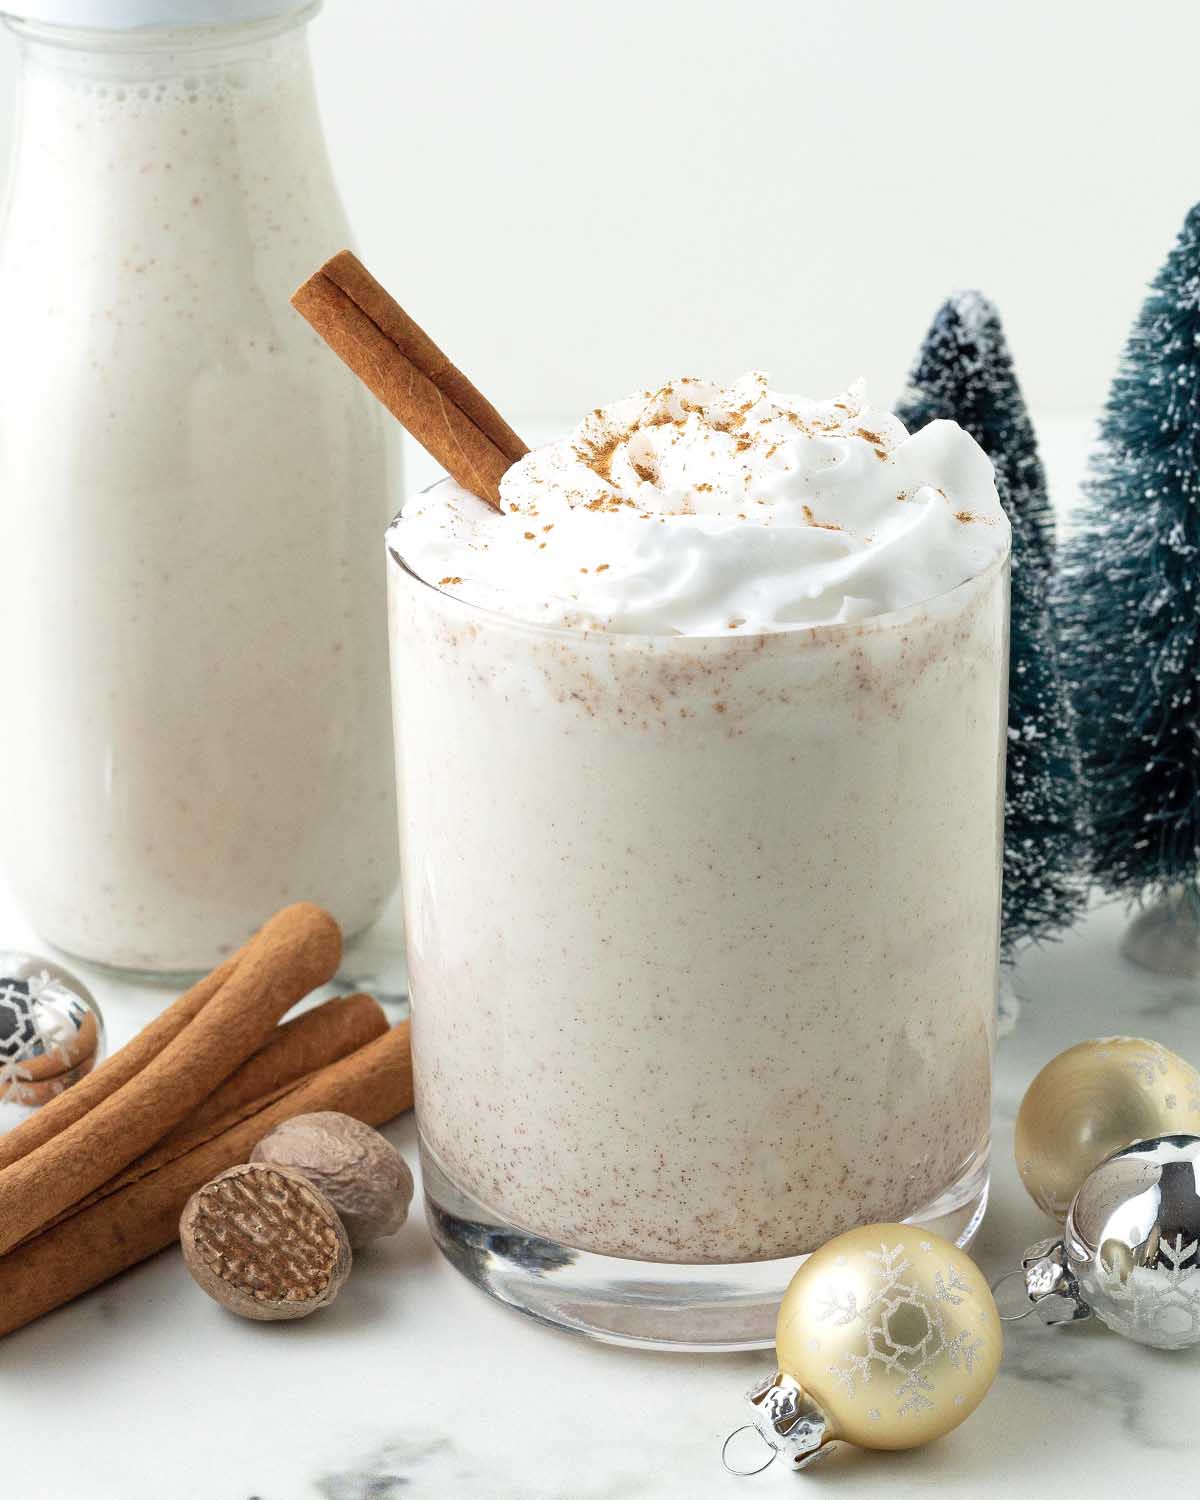 A glass of vegan eggnog topped with coconut whipped cream, the glass is surrounded by holiday decorations and spices.